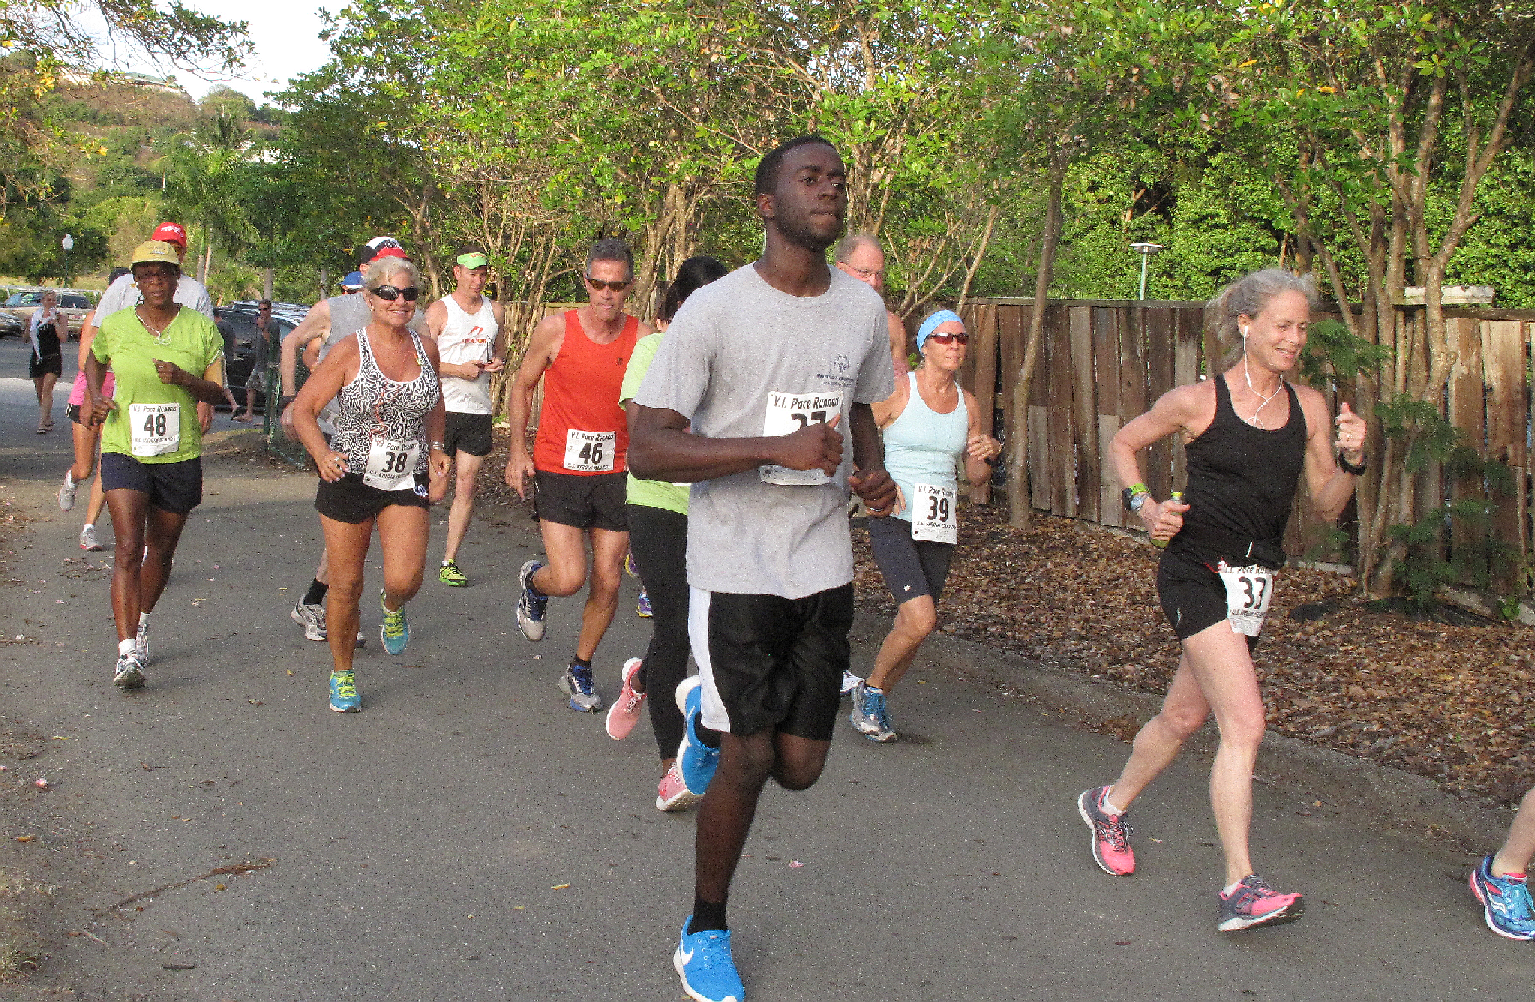 VI PaceRunners Give Results for Paradise 5K Road Race